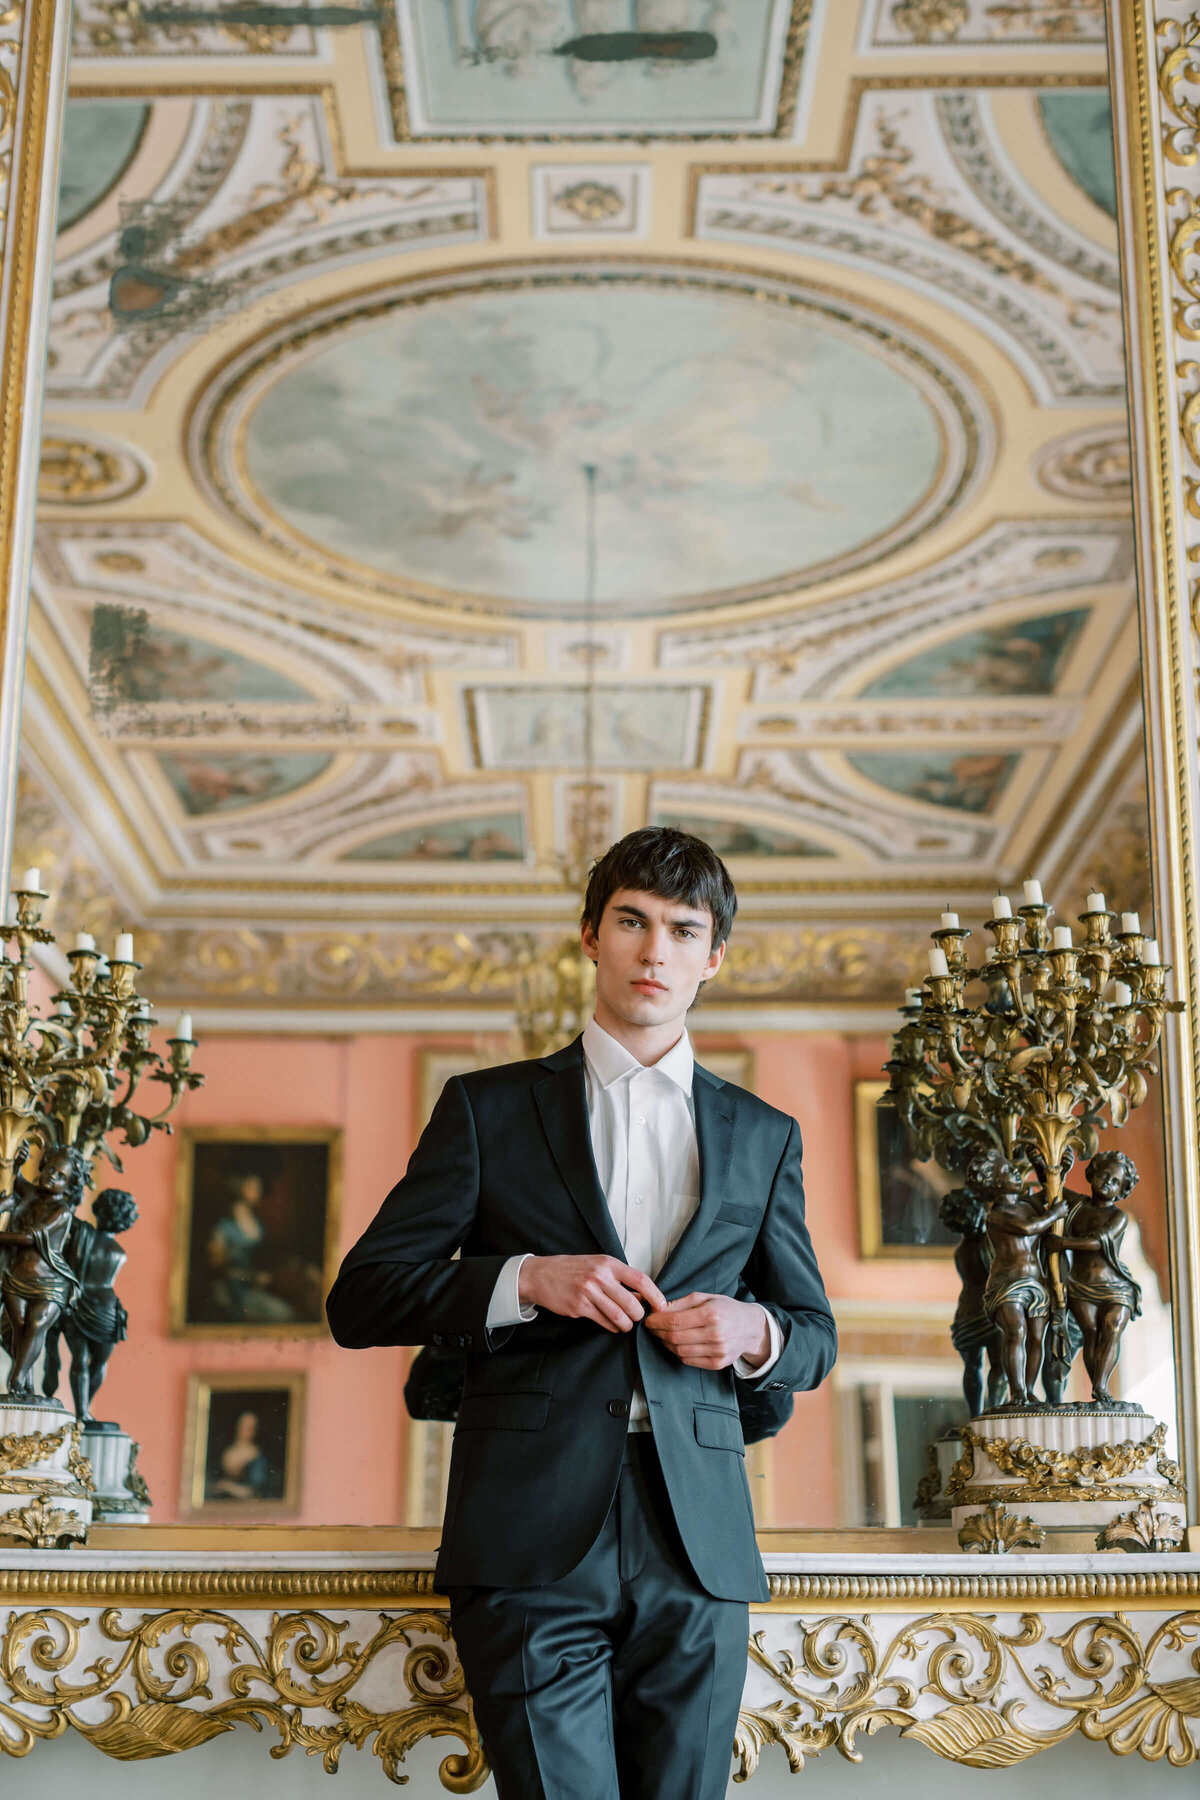 groom buttoning a black wedding suit in the versailles ballroom at avington park with a mirror behind him reflecting the elaborate ceiling painting